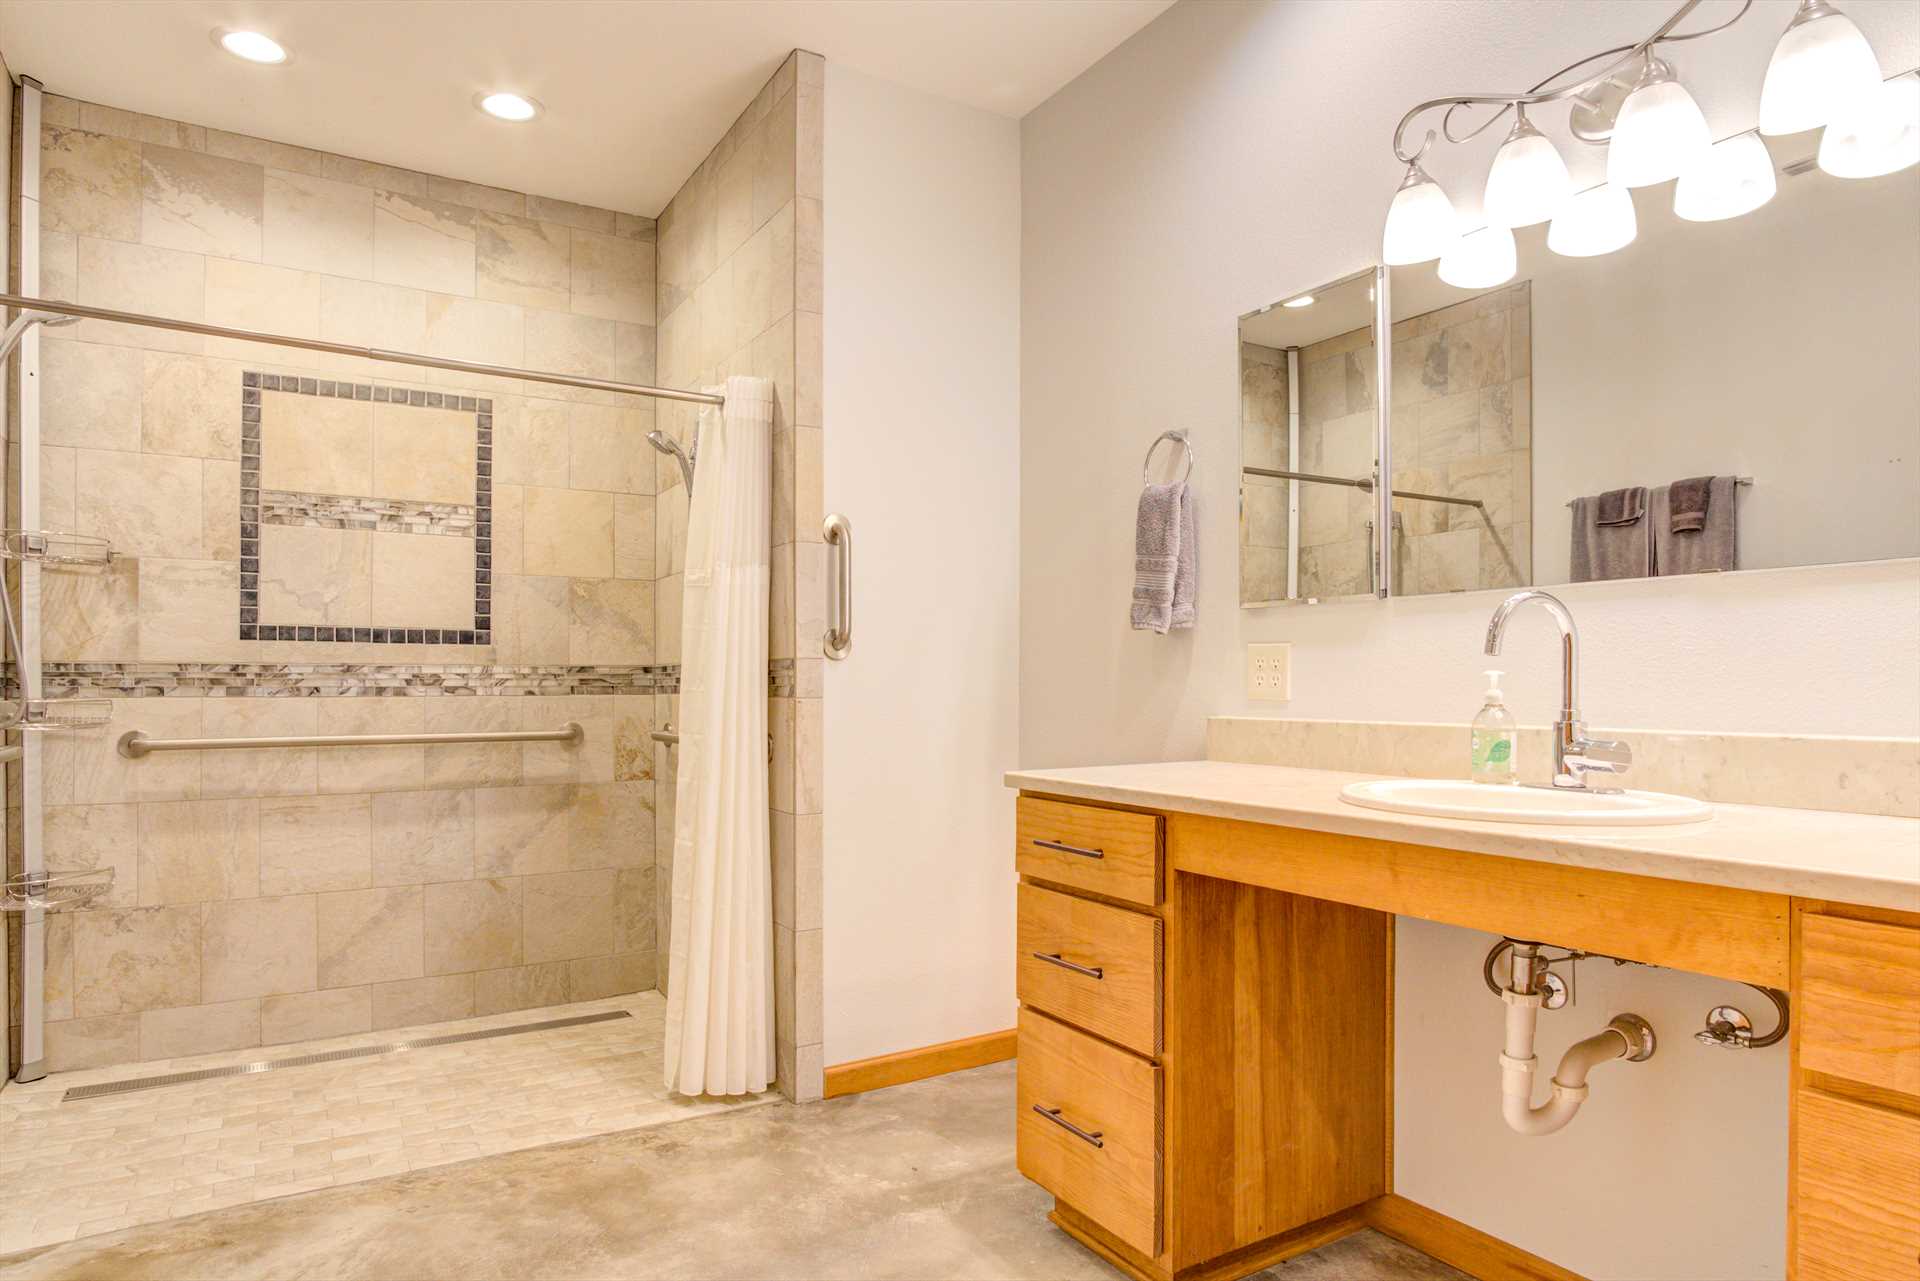                                                 A roomy, easily accessible, and sparkling clean shower is the centerpiece of the master bath.